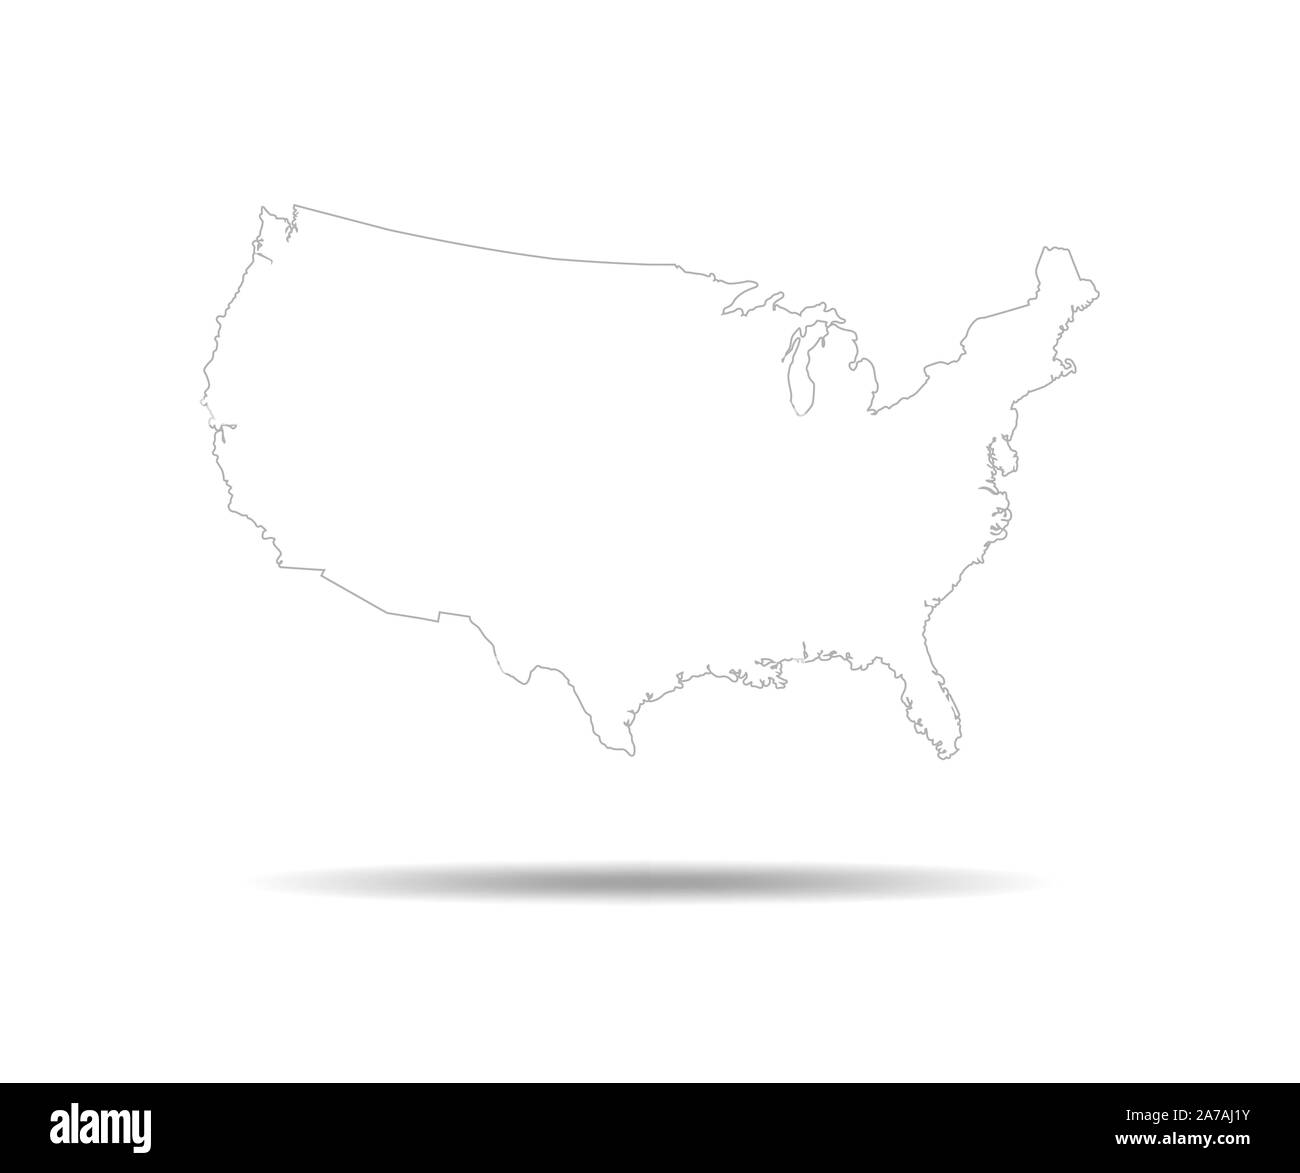 Black USA map - vector illustration. Black contour of United States. Stock Vector